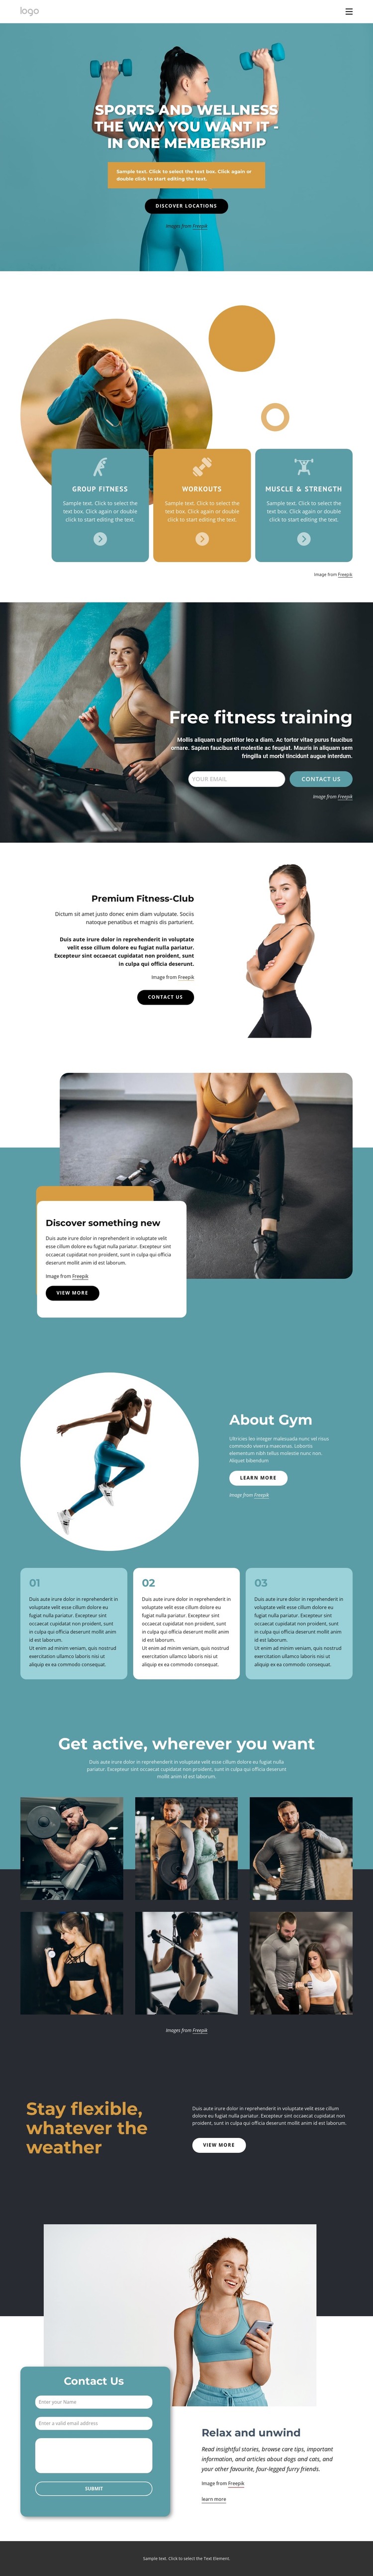 Workout anywhere with one membership HTML Template